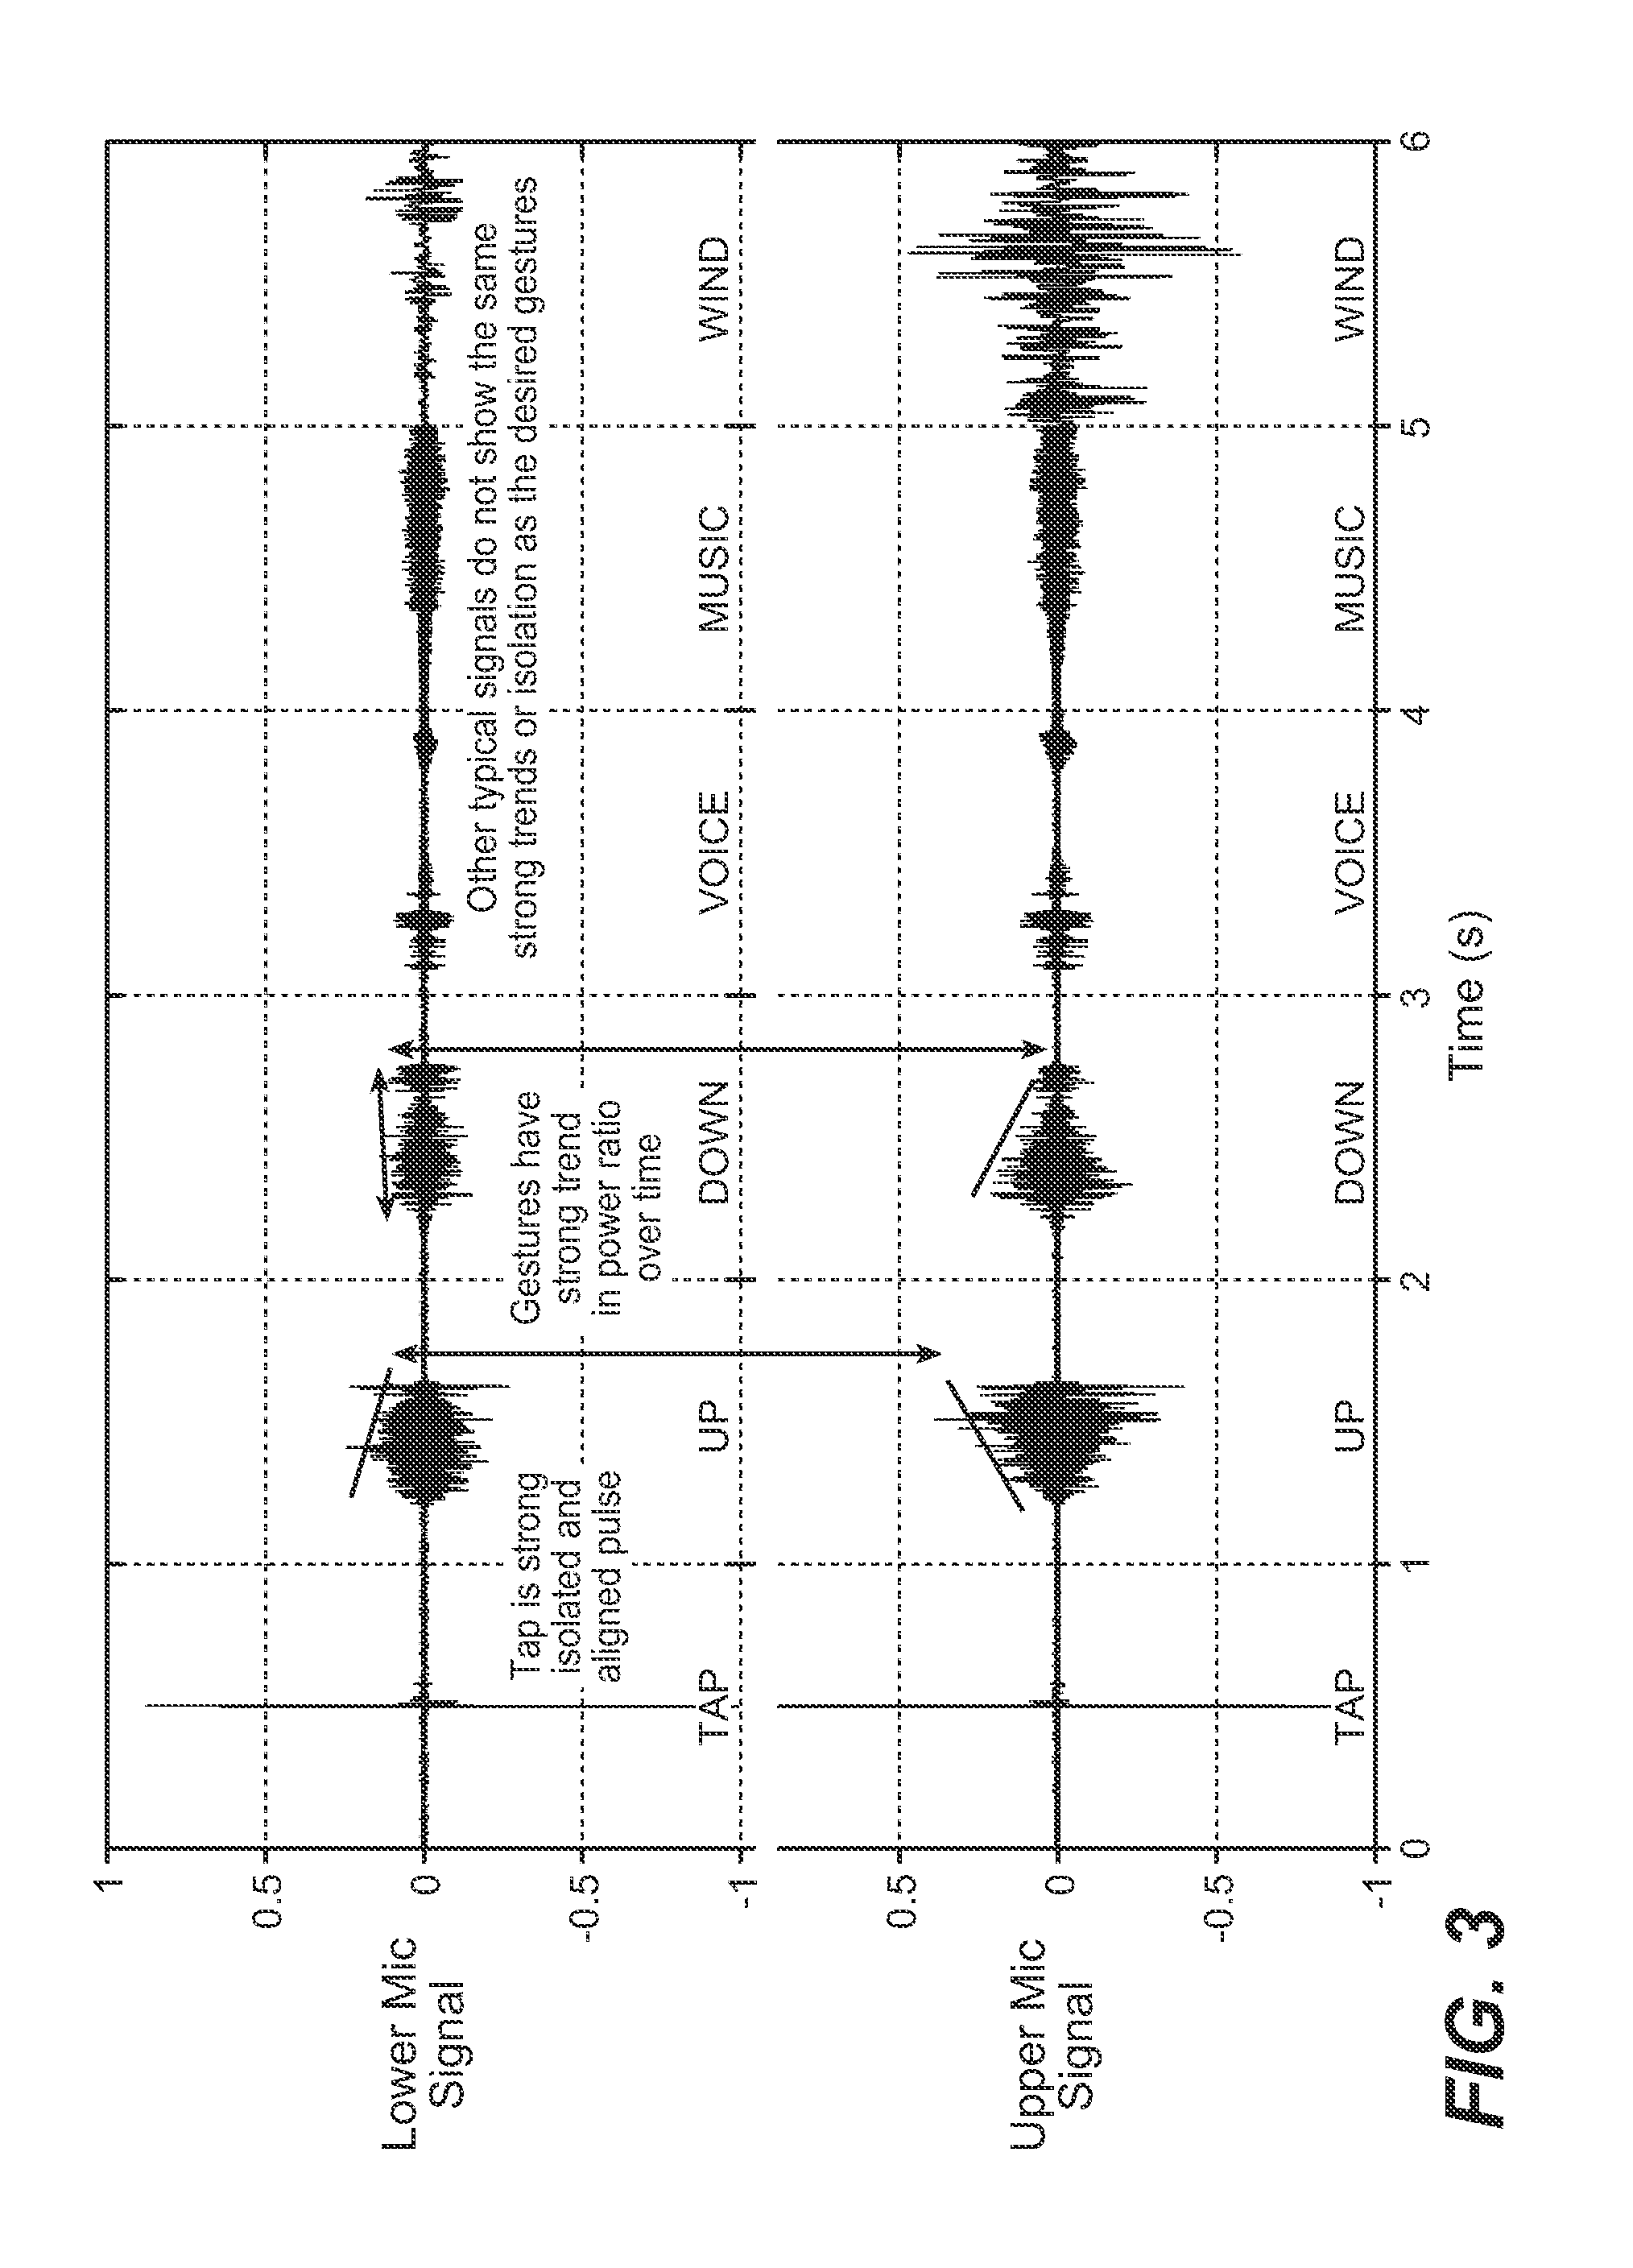 Method and System for Touch Gesture Detection in Response to Microphone Output